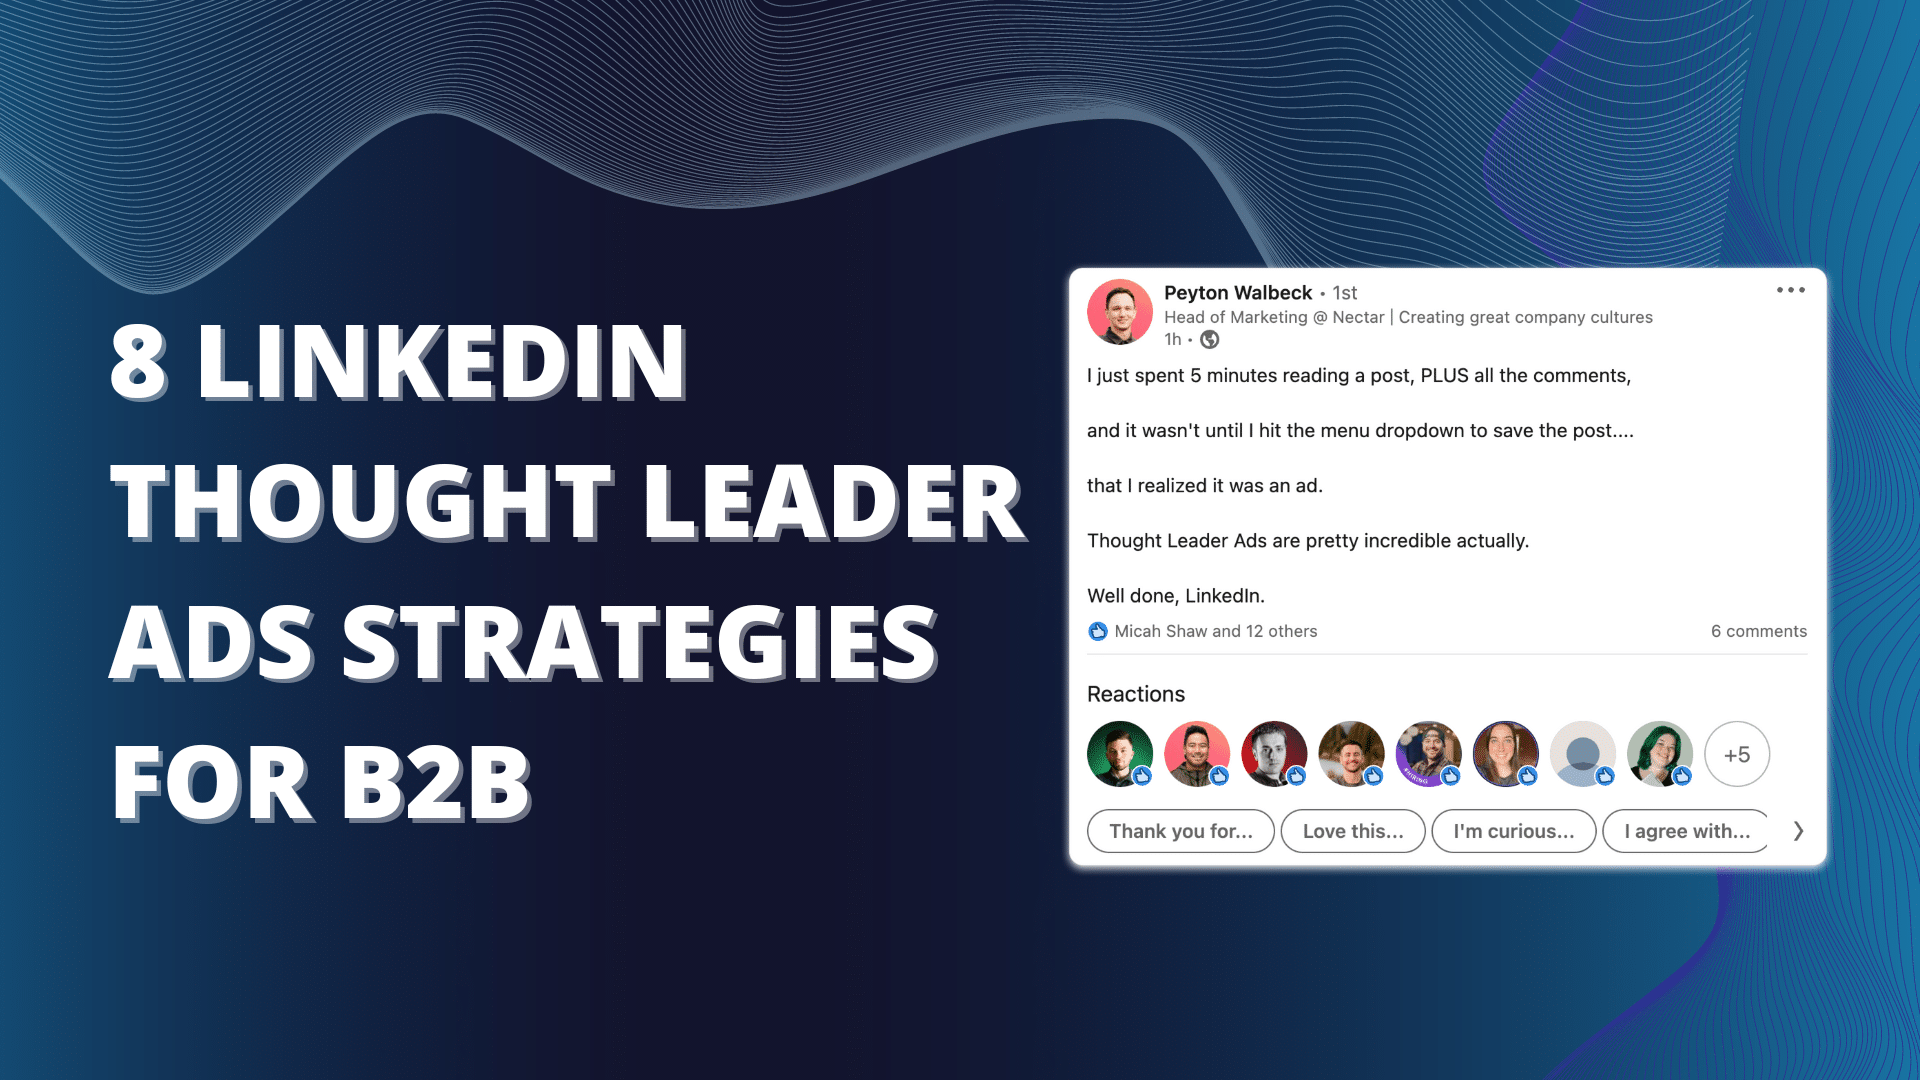 8 LinkedIn Thought Leader Ads Strategies for B2B